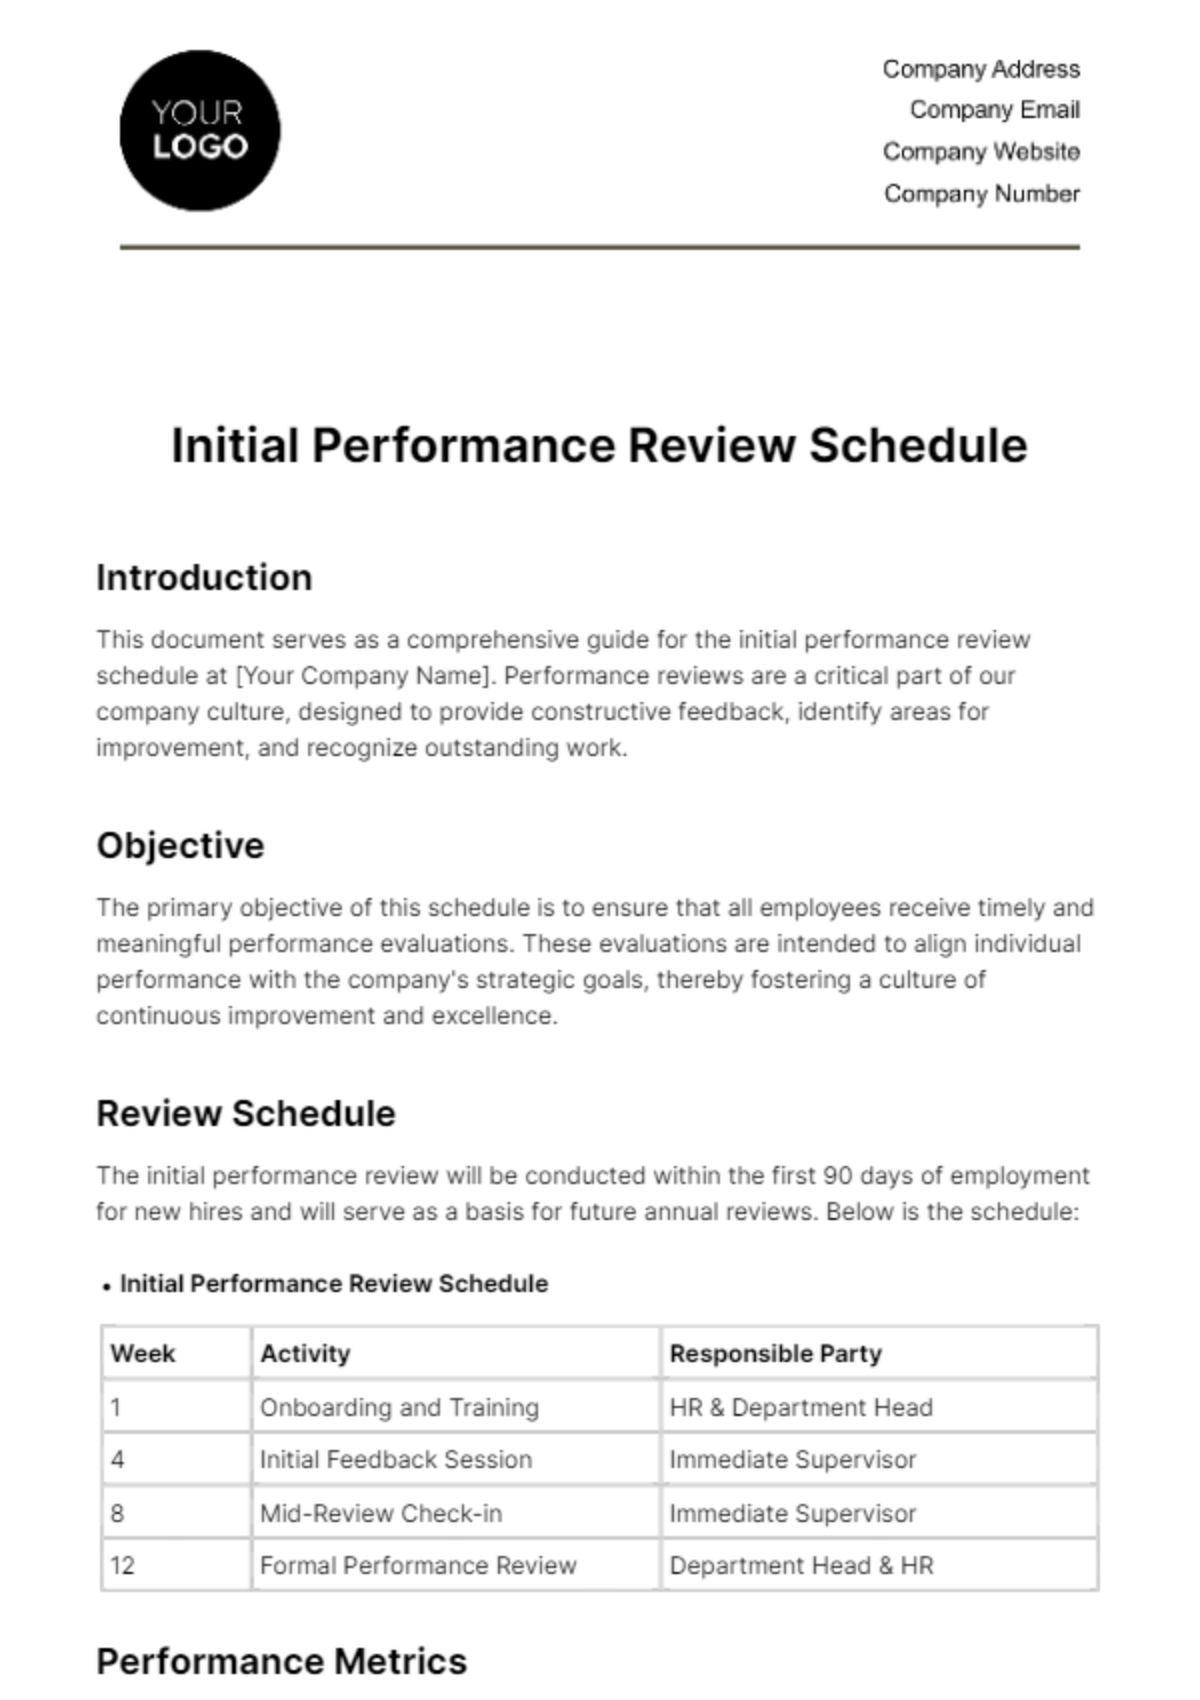 Free Initial Performance Review Schedule HR Template